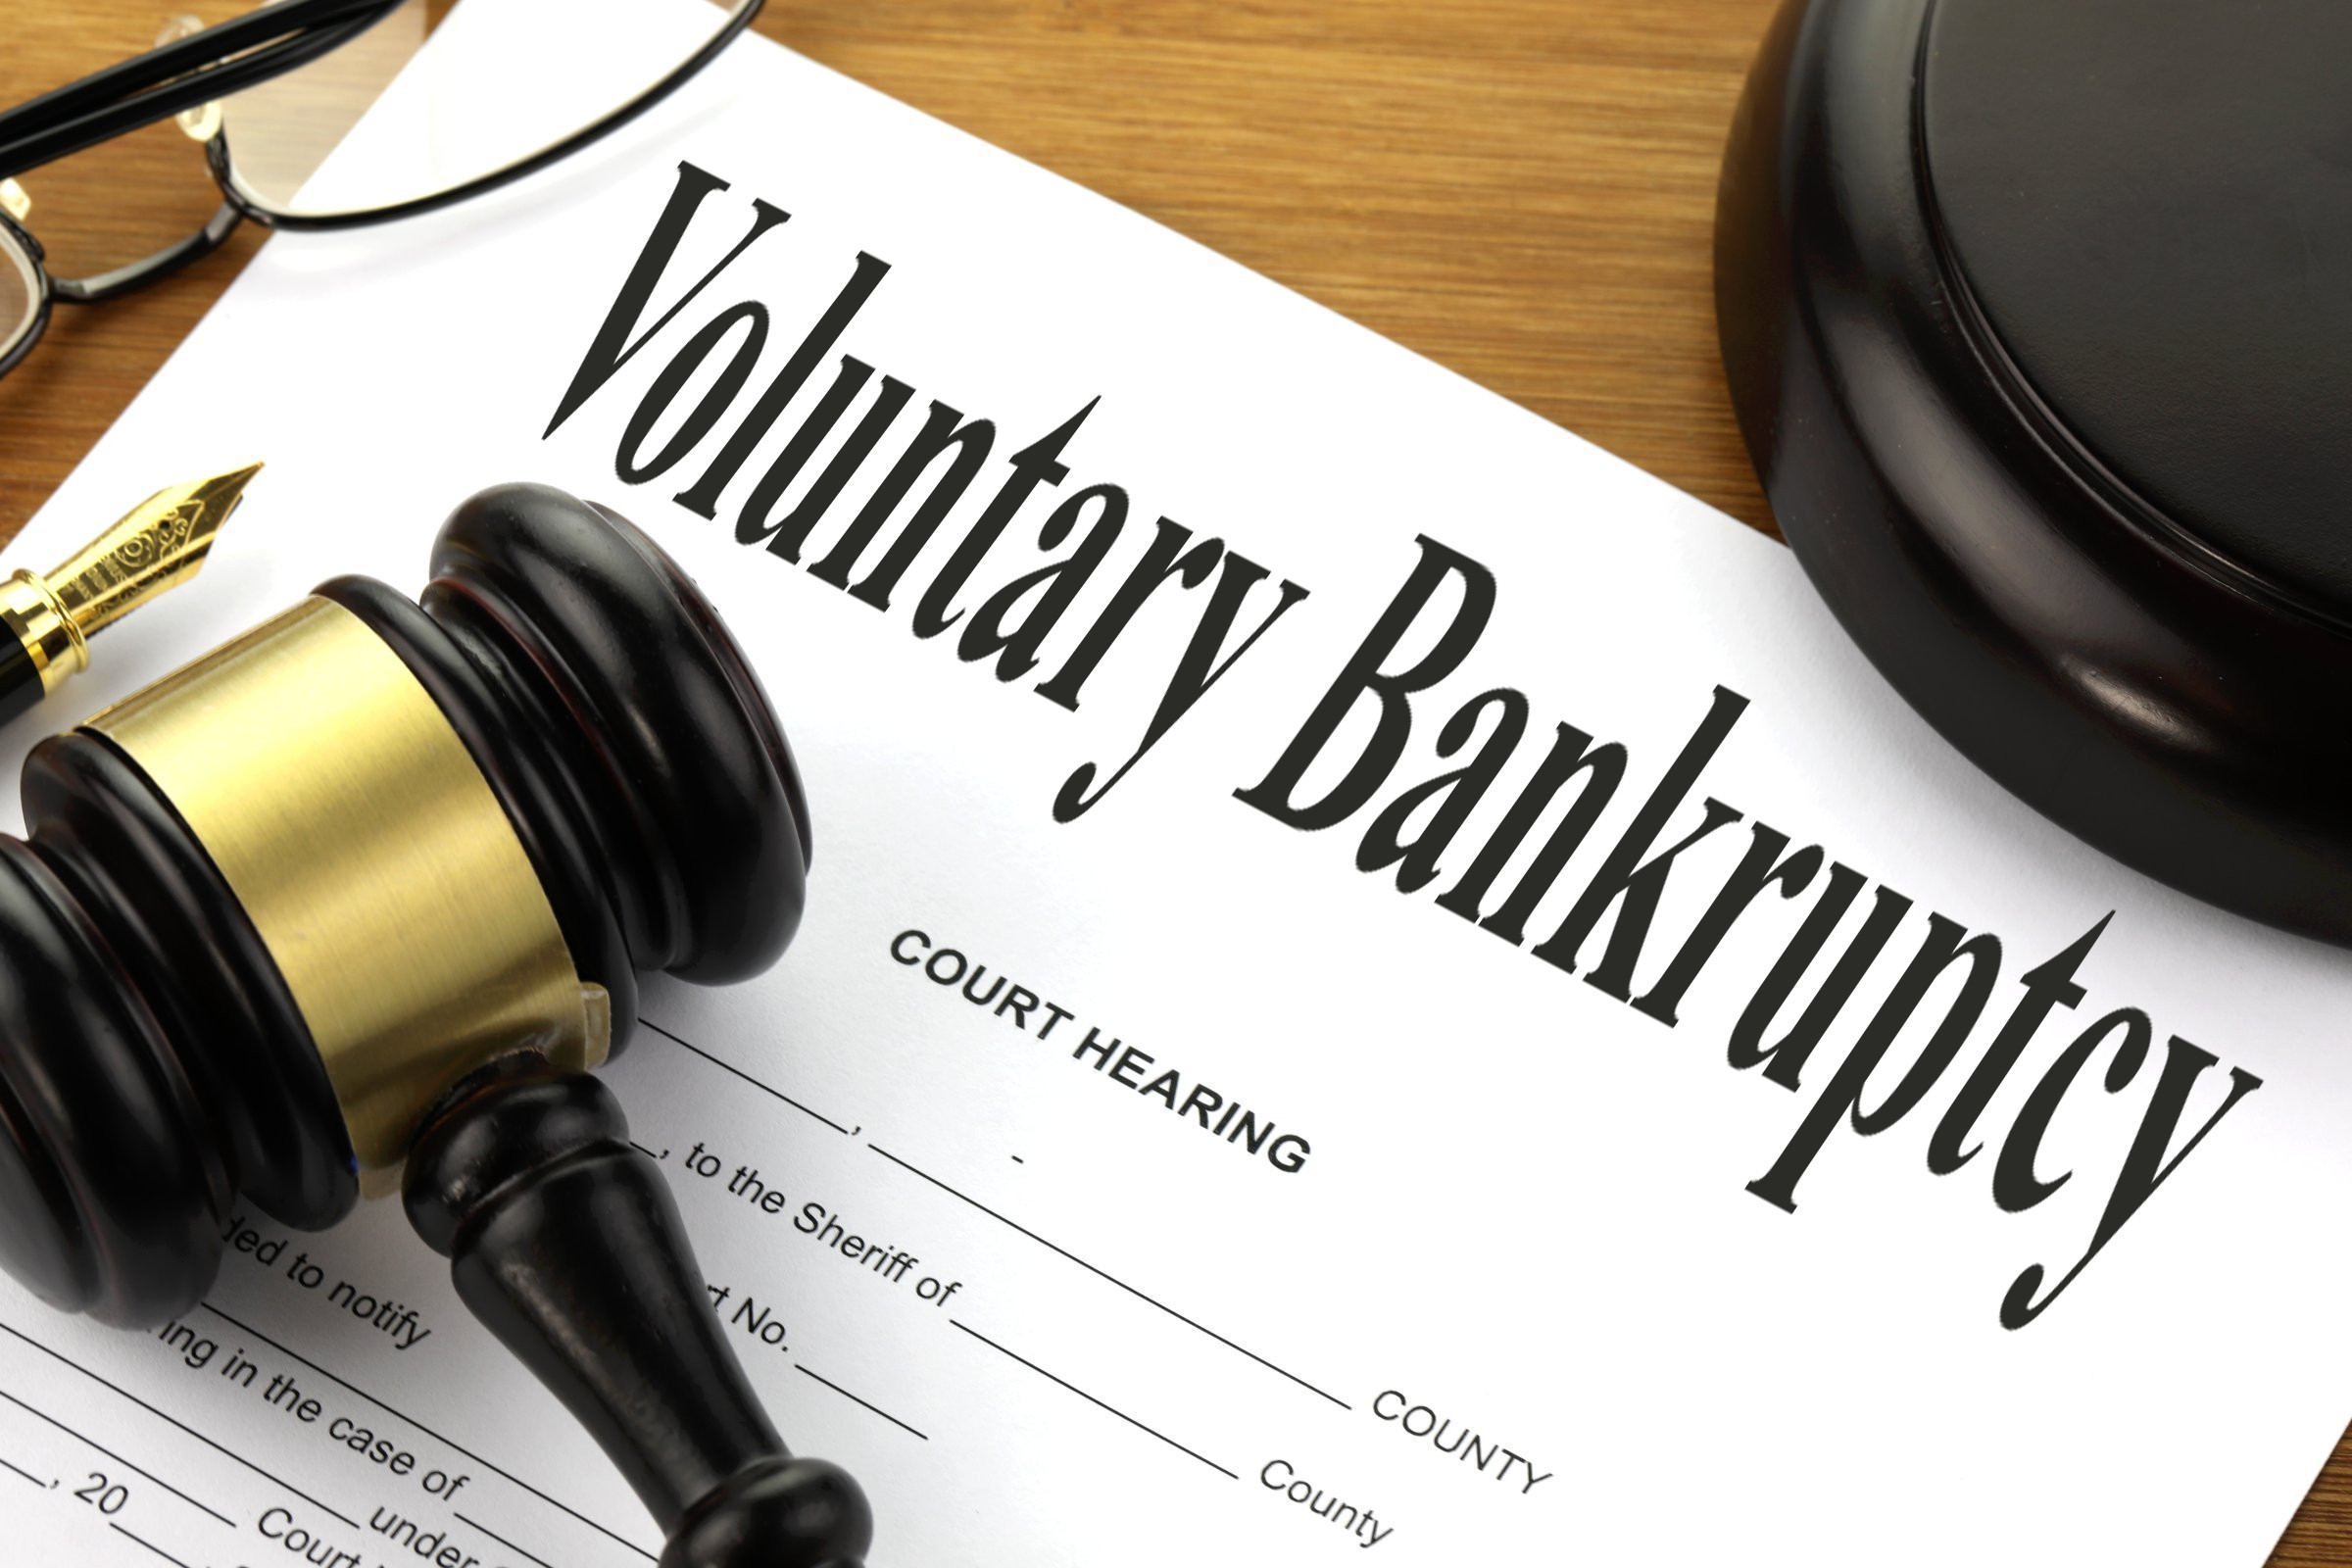 voluntary bankruptcy